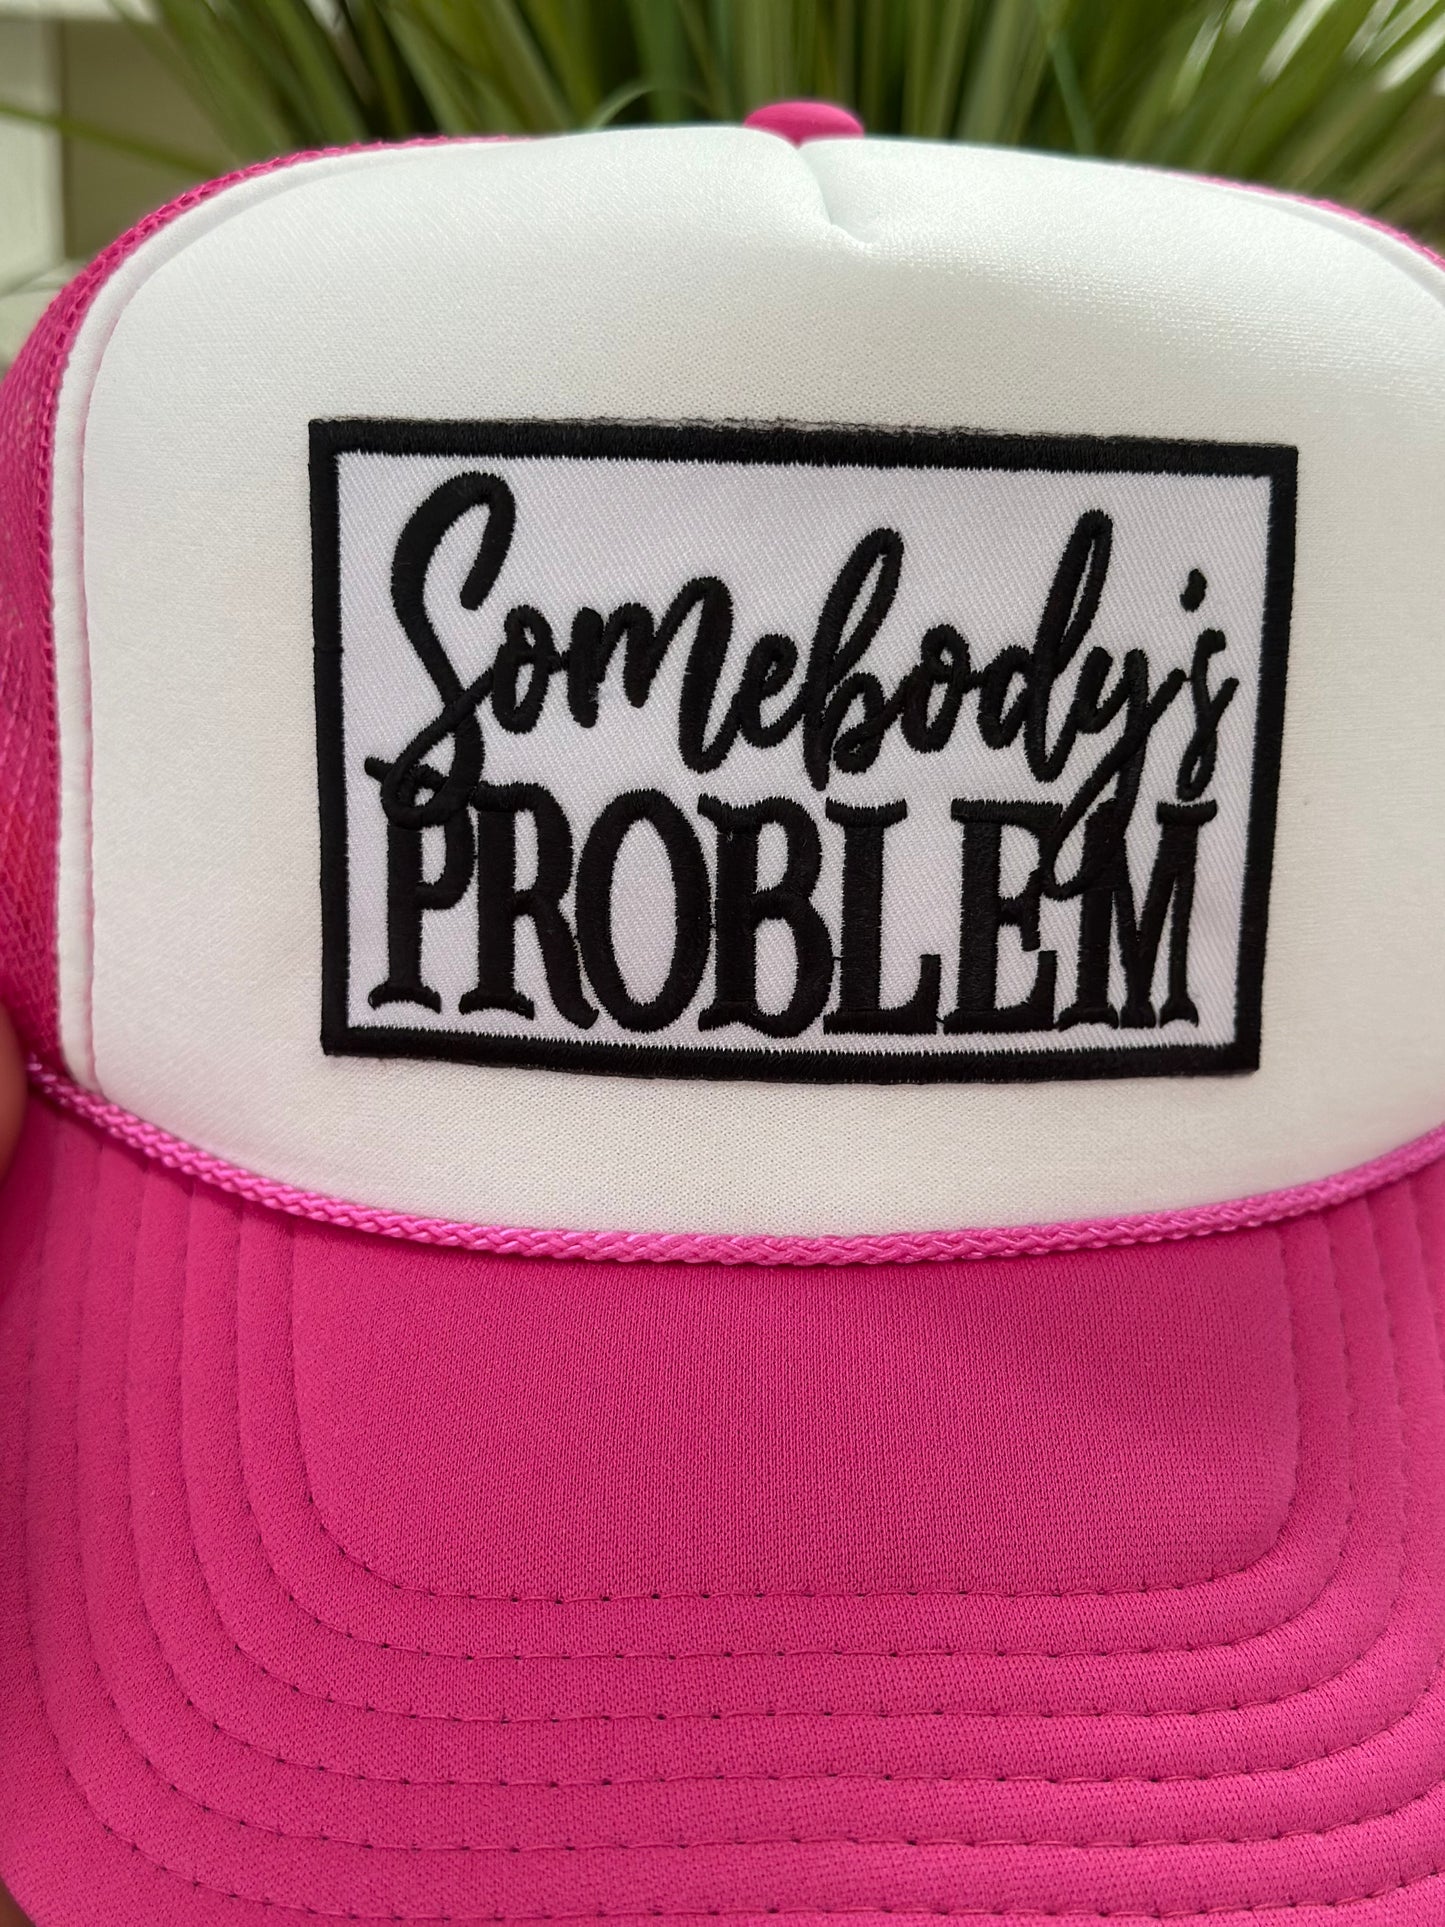 Somebody's Problem Cap in Hot Pink